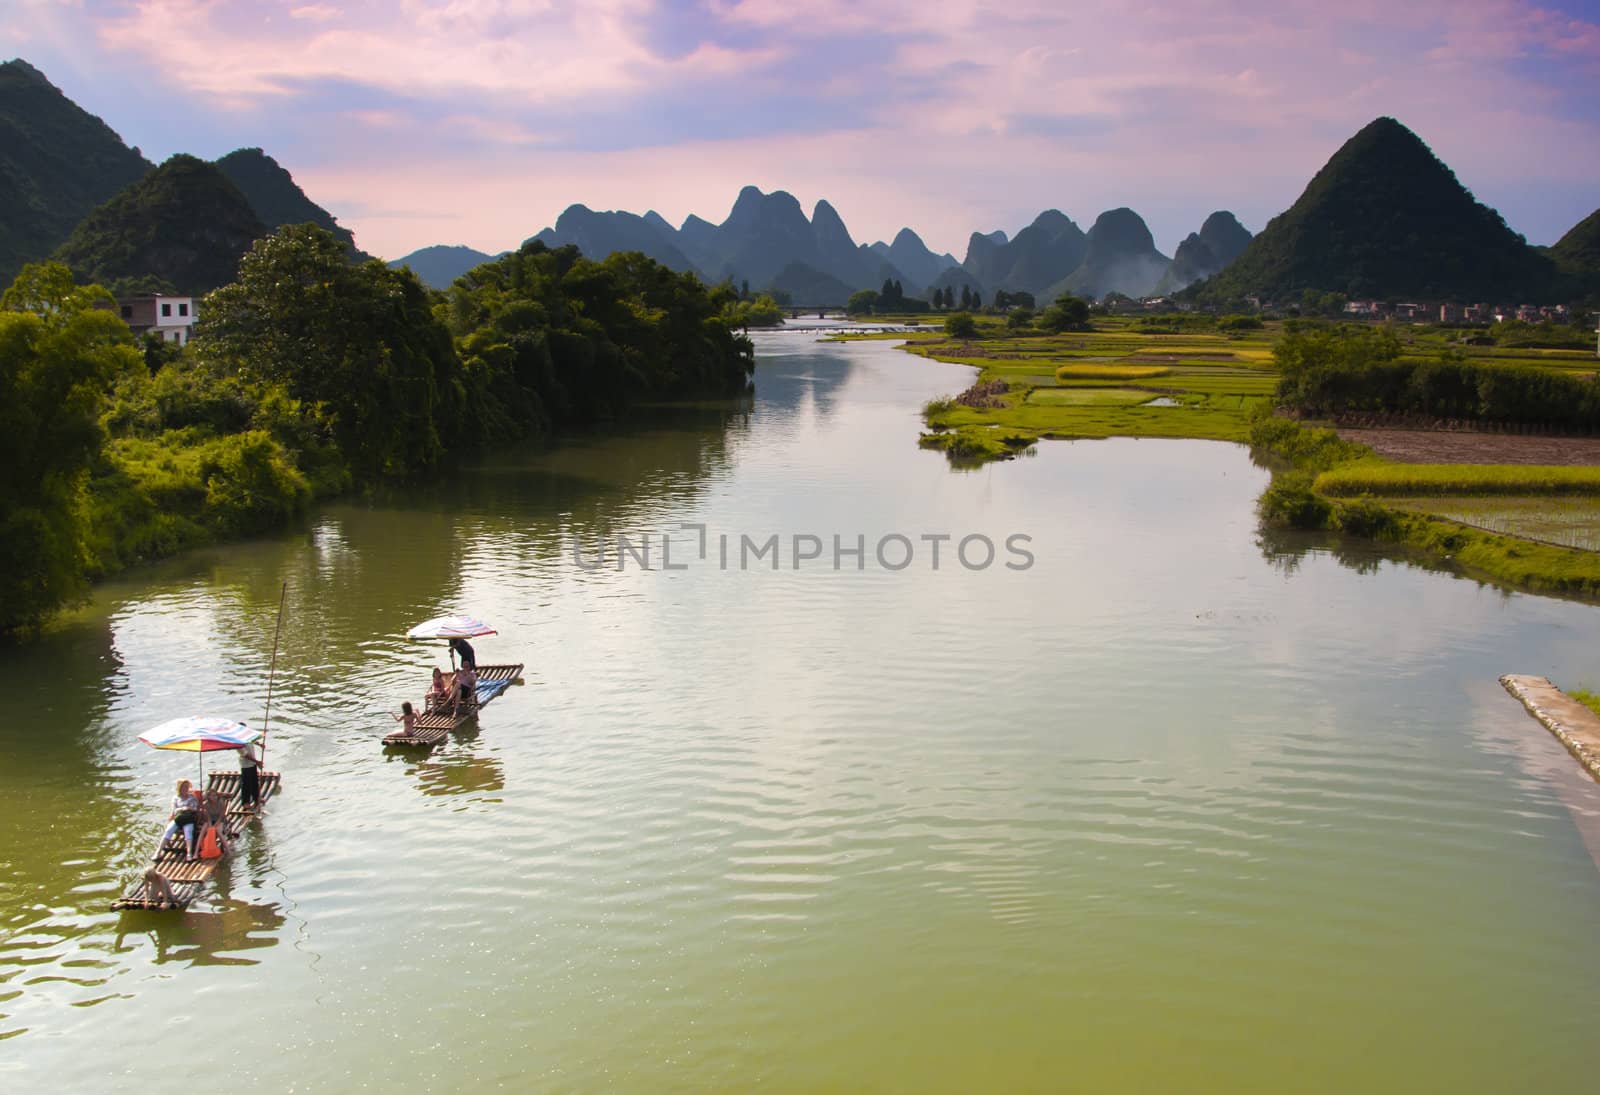 Sunset over the Yulong River by urmoments